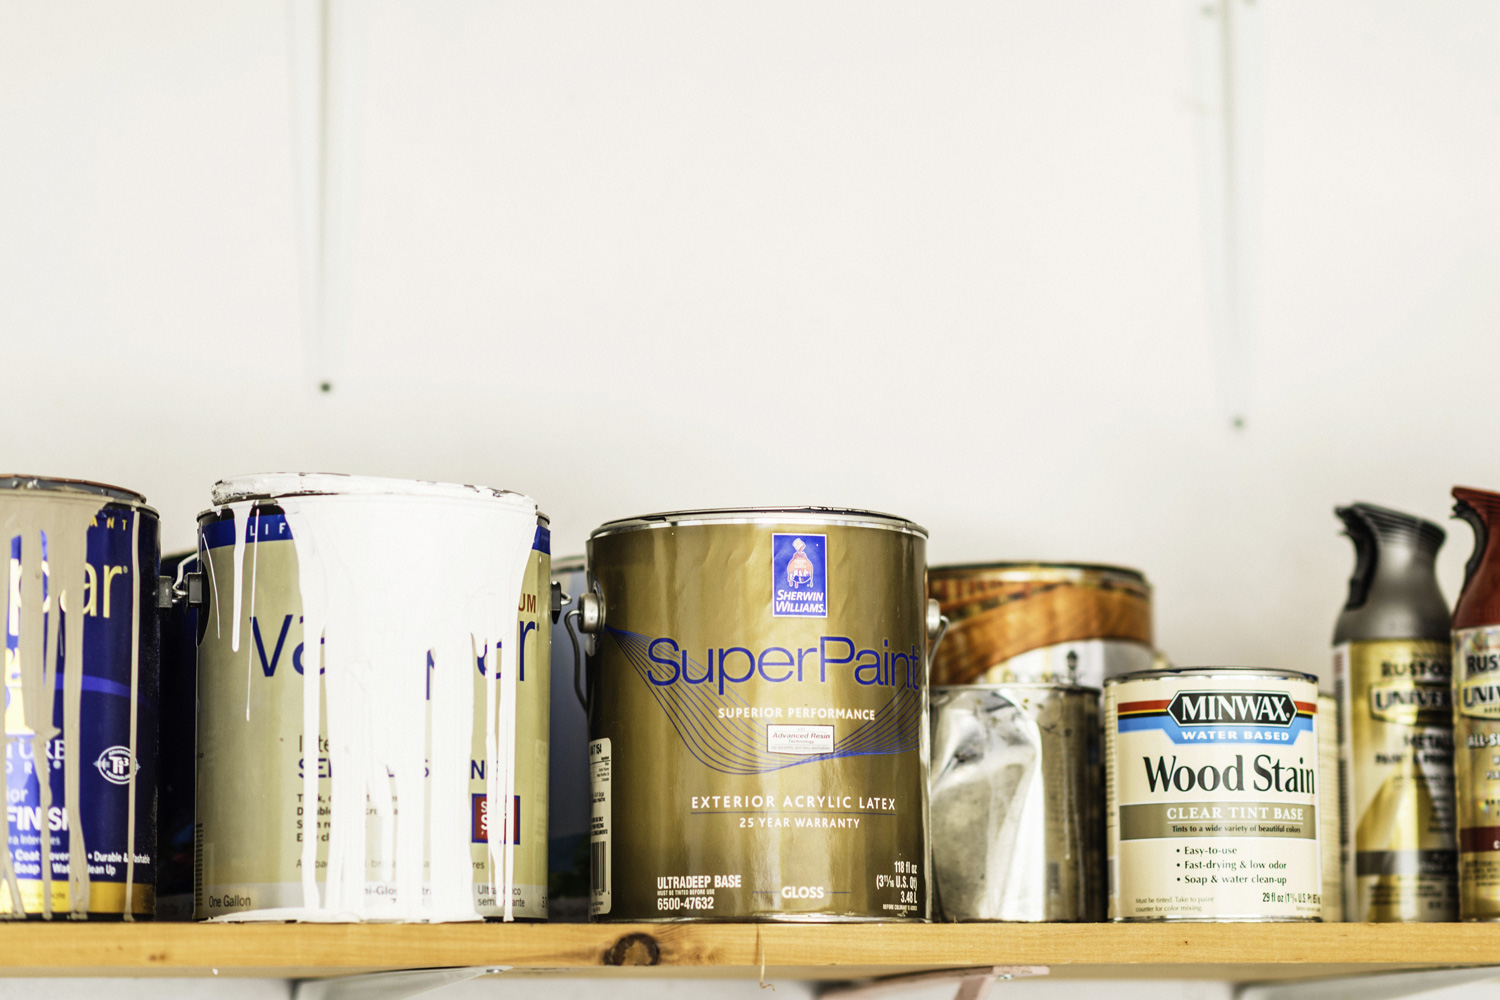  A horizontal shot of a collection of opened and unopened American brand cans of paint, wood stain and paint sprays organized neatly on a wooden shelf